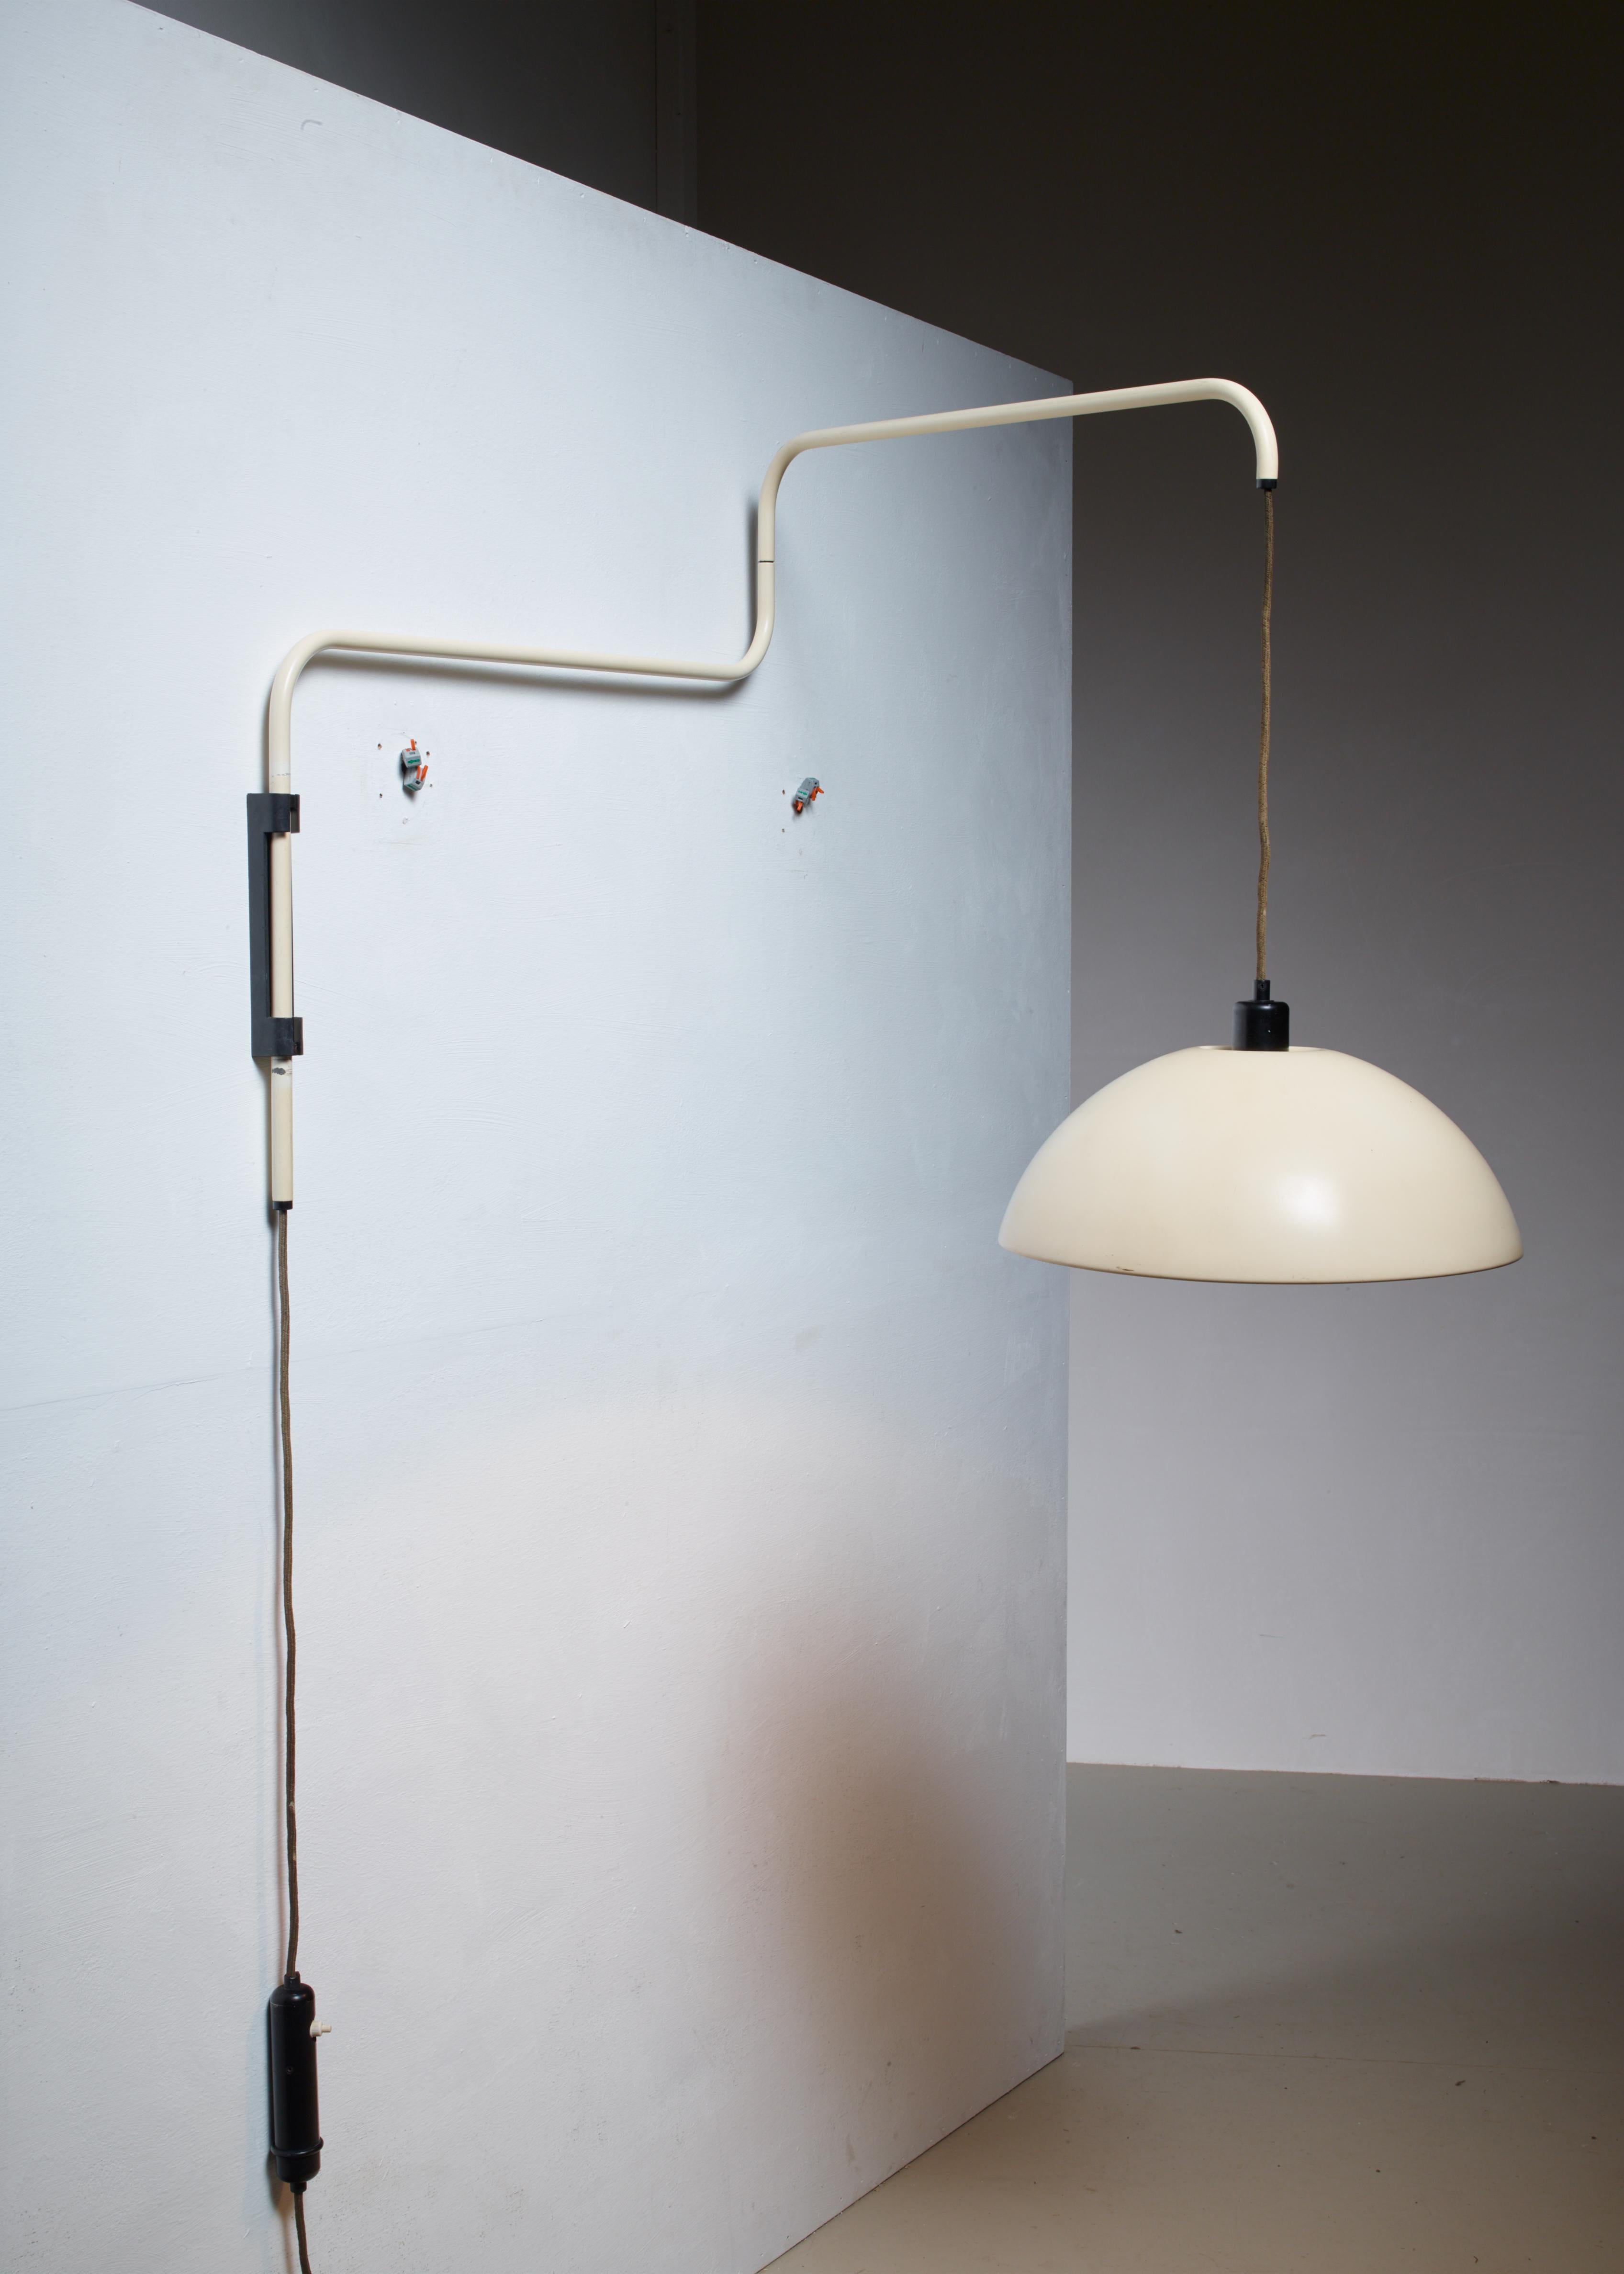 A Mid-Century wall lamp by Elio Martinelli for Martinelli Luce, made of off-white lacquered metal. The lamp has a swiveling, fully adjustable stem. The 40 cm diameter shade is height adjustable with a black steel counterweight with integrated light